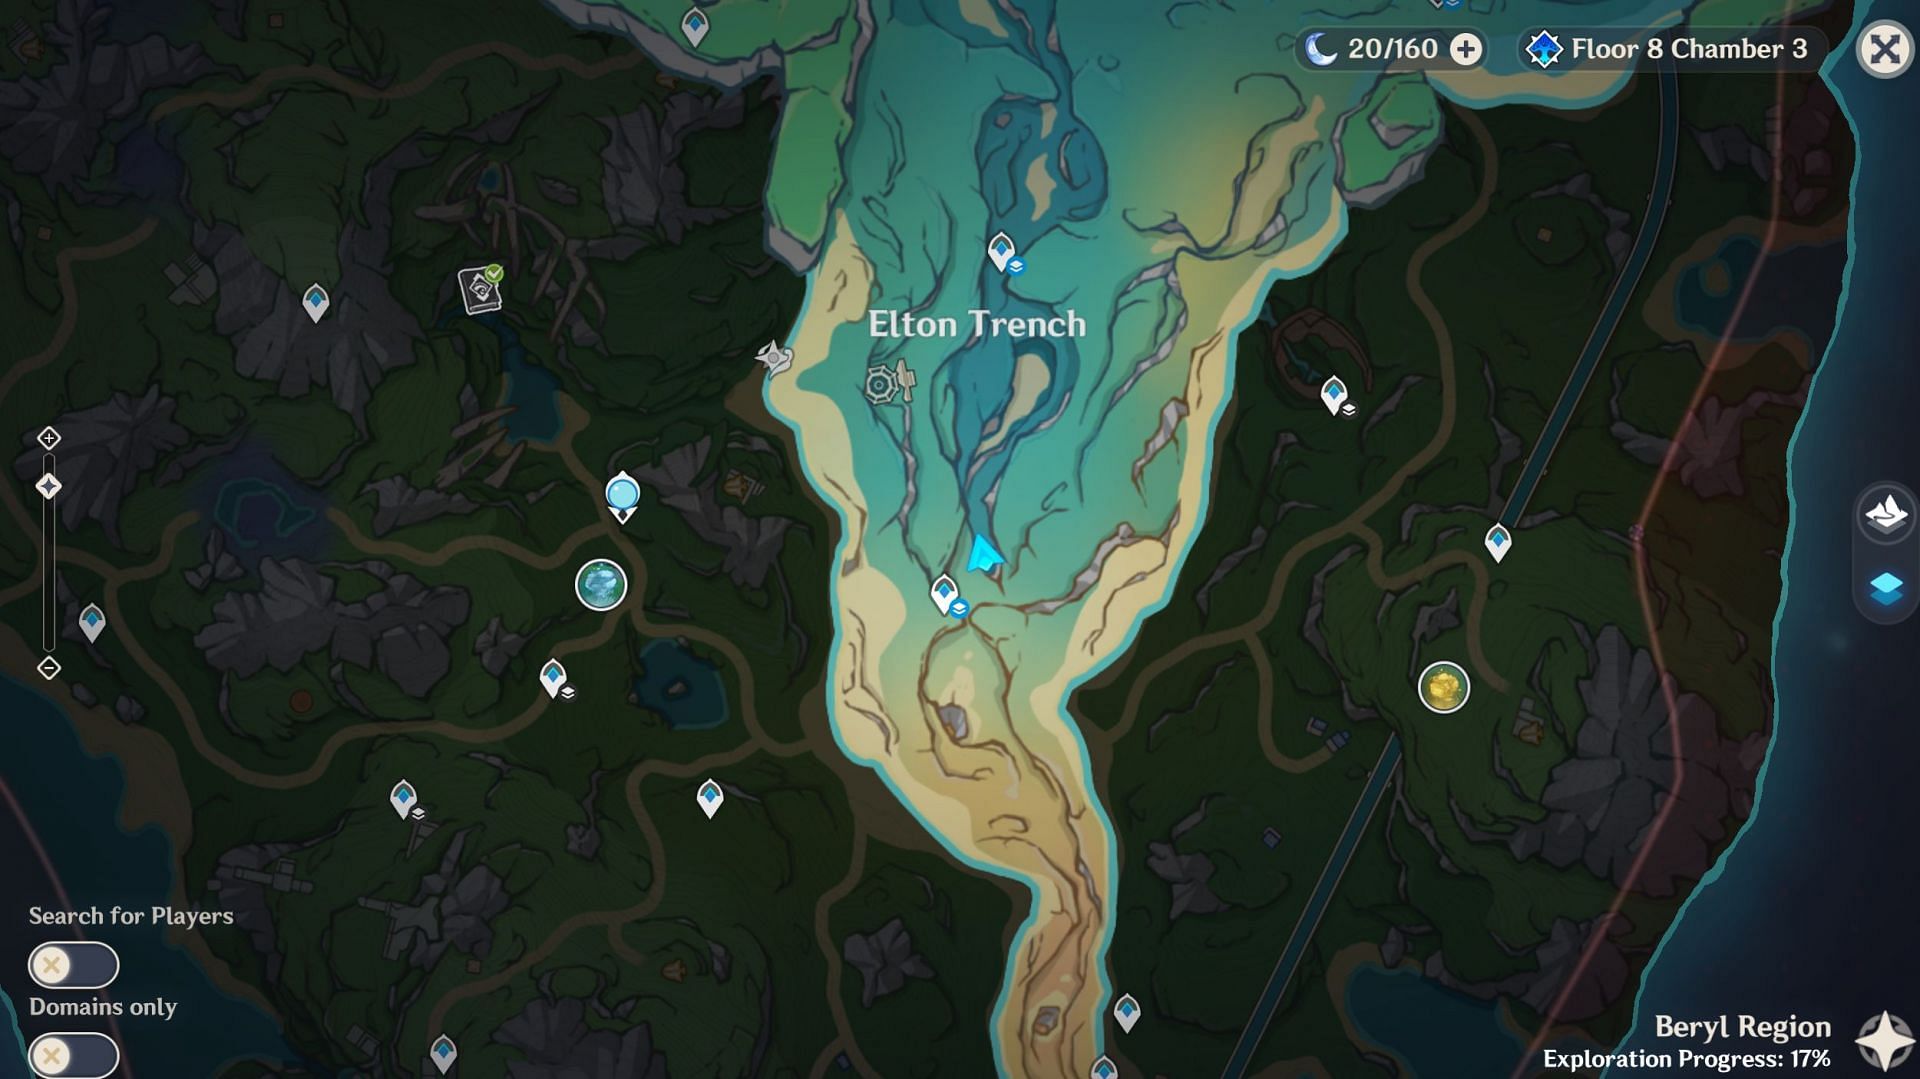 Location of Fading Veteran marked on the map (Image via Hoyoverse)